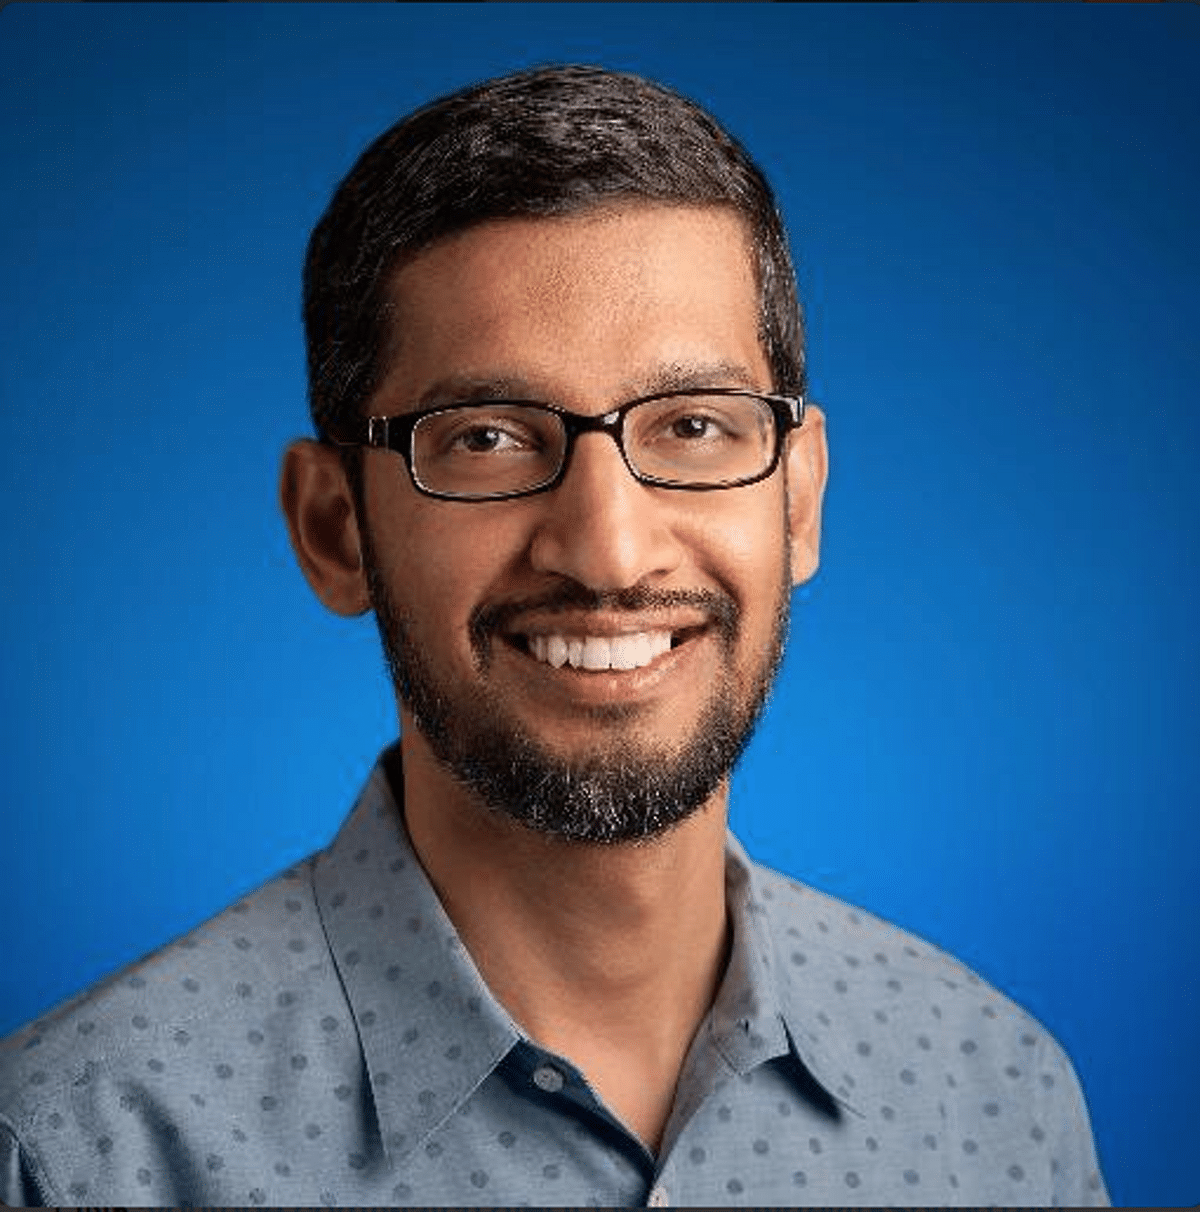 New Google CEO Pichai made his ascent with low-key style and technical chops.